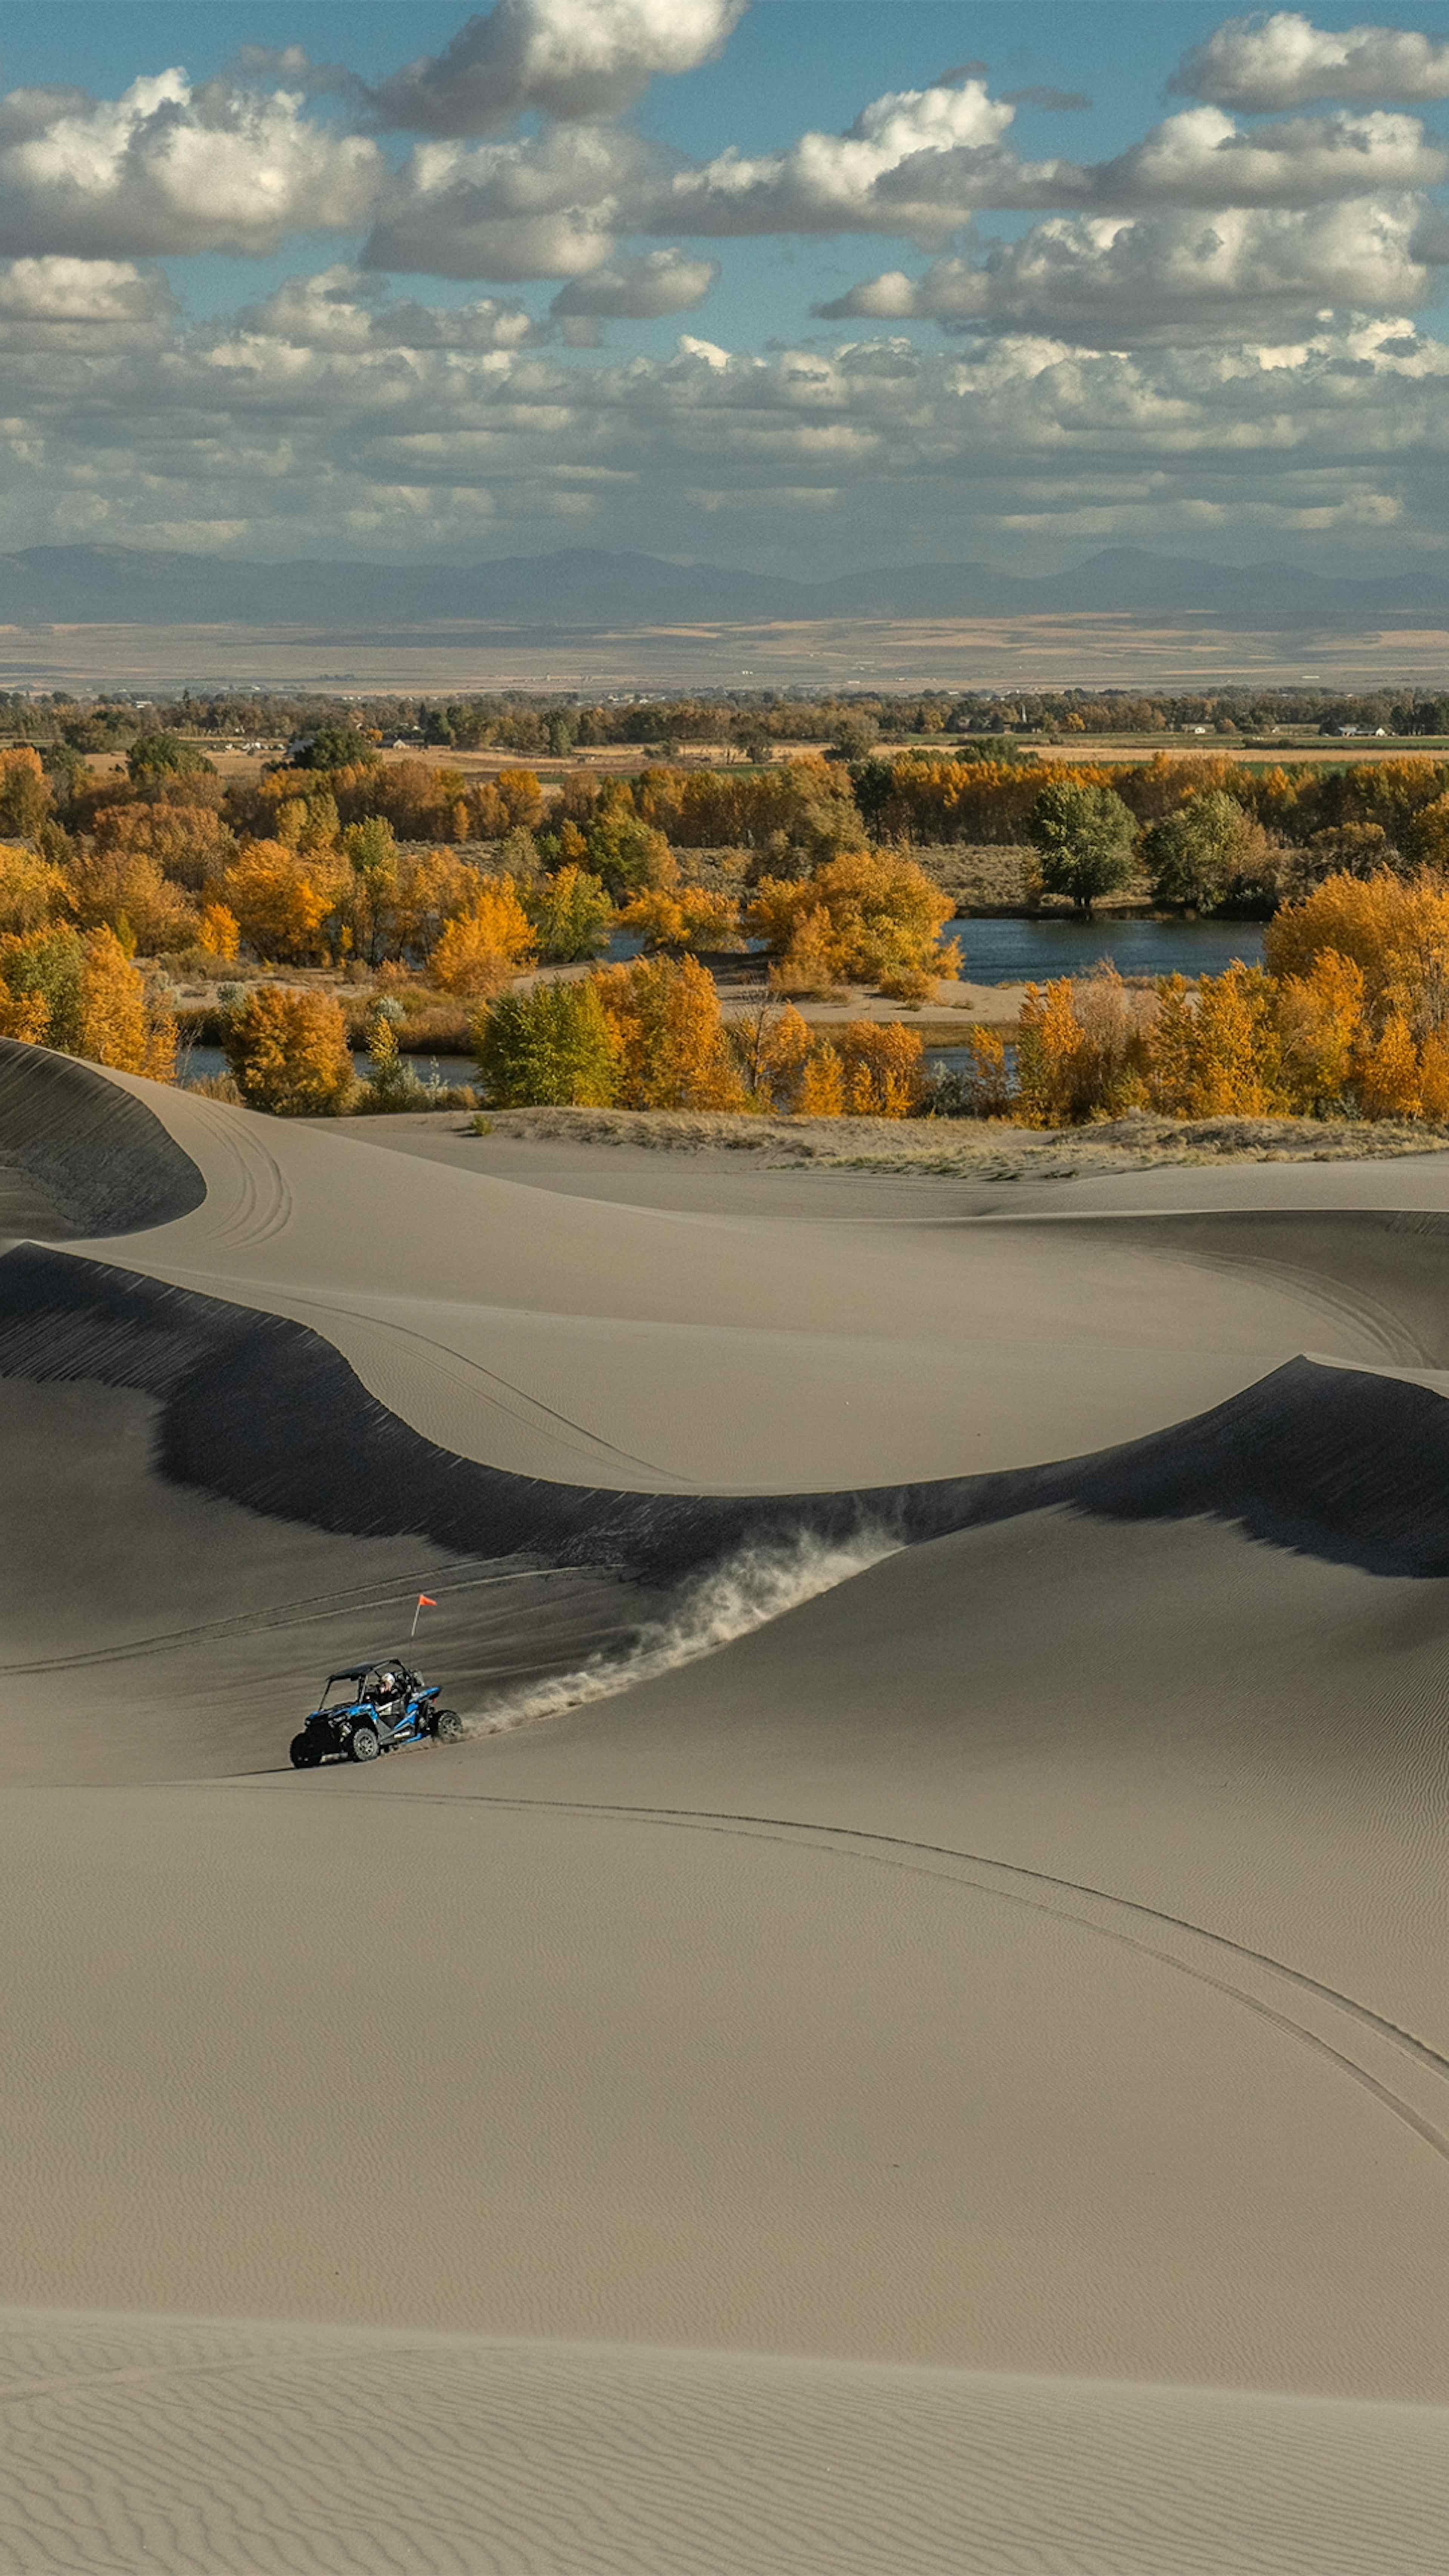 An ATV races the sand dunes in St. Anthony, Idaho.